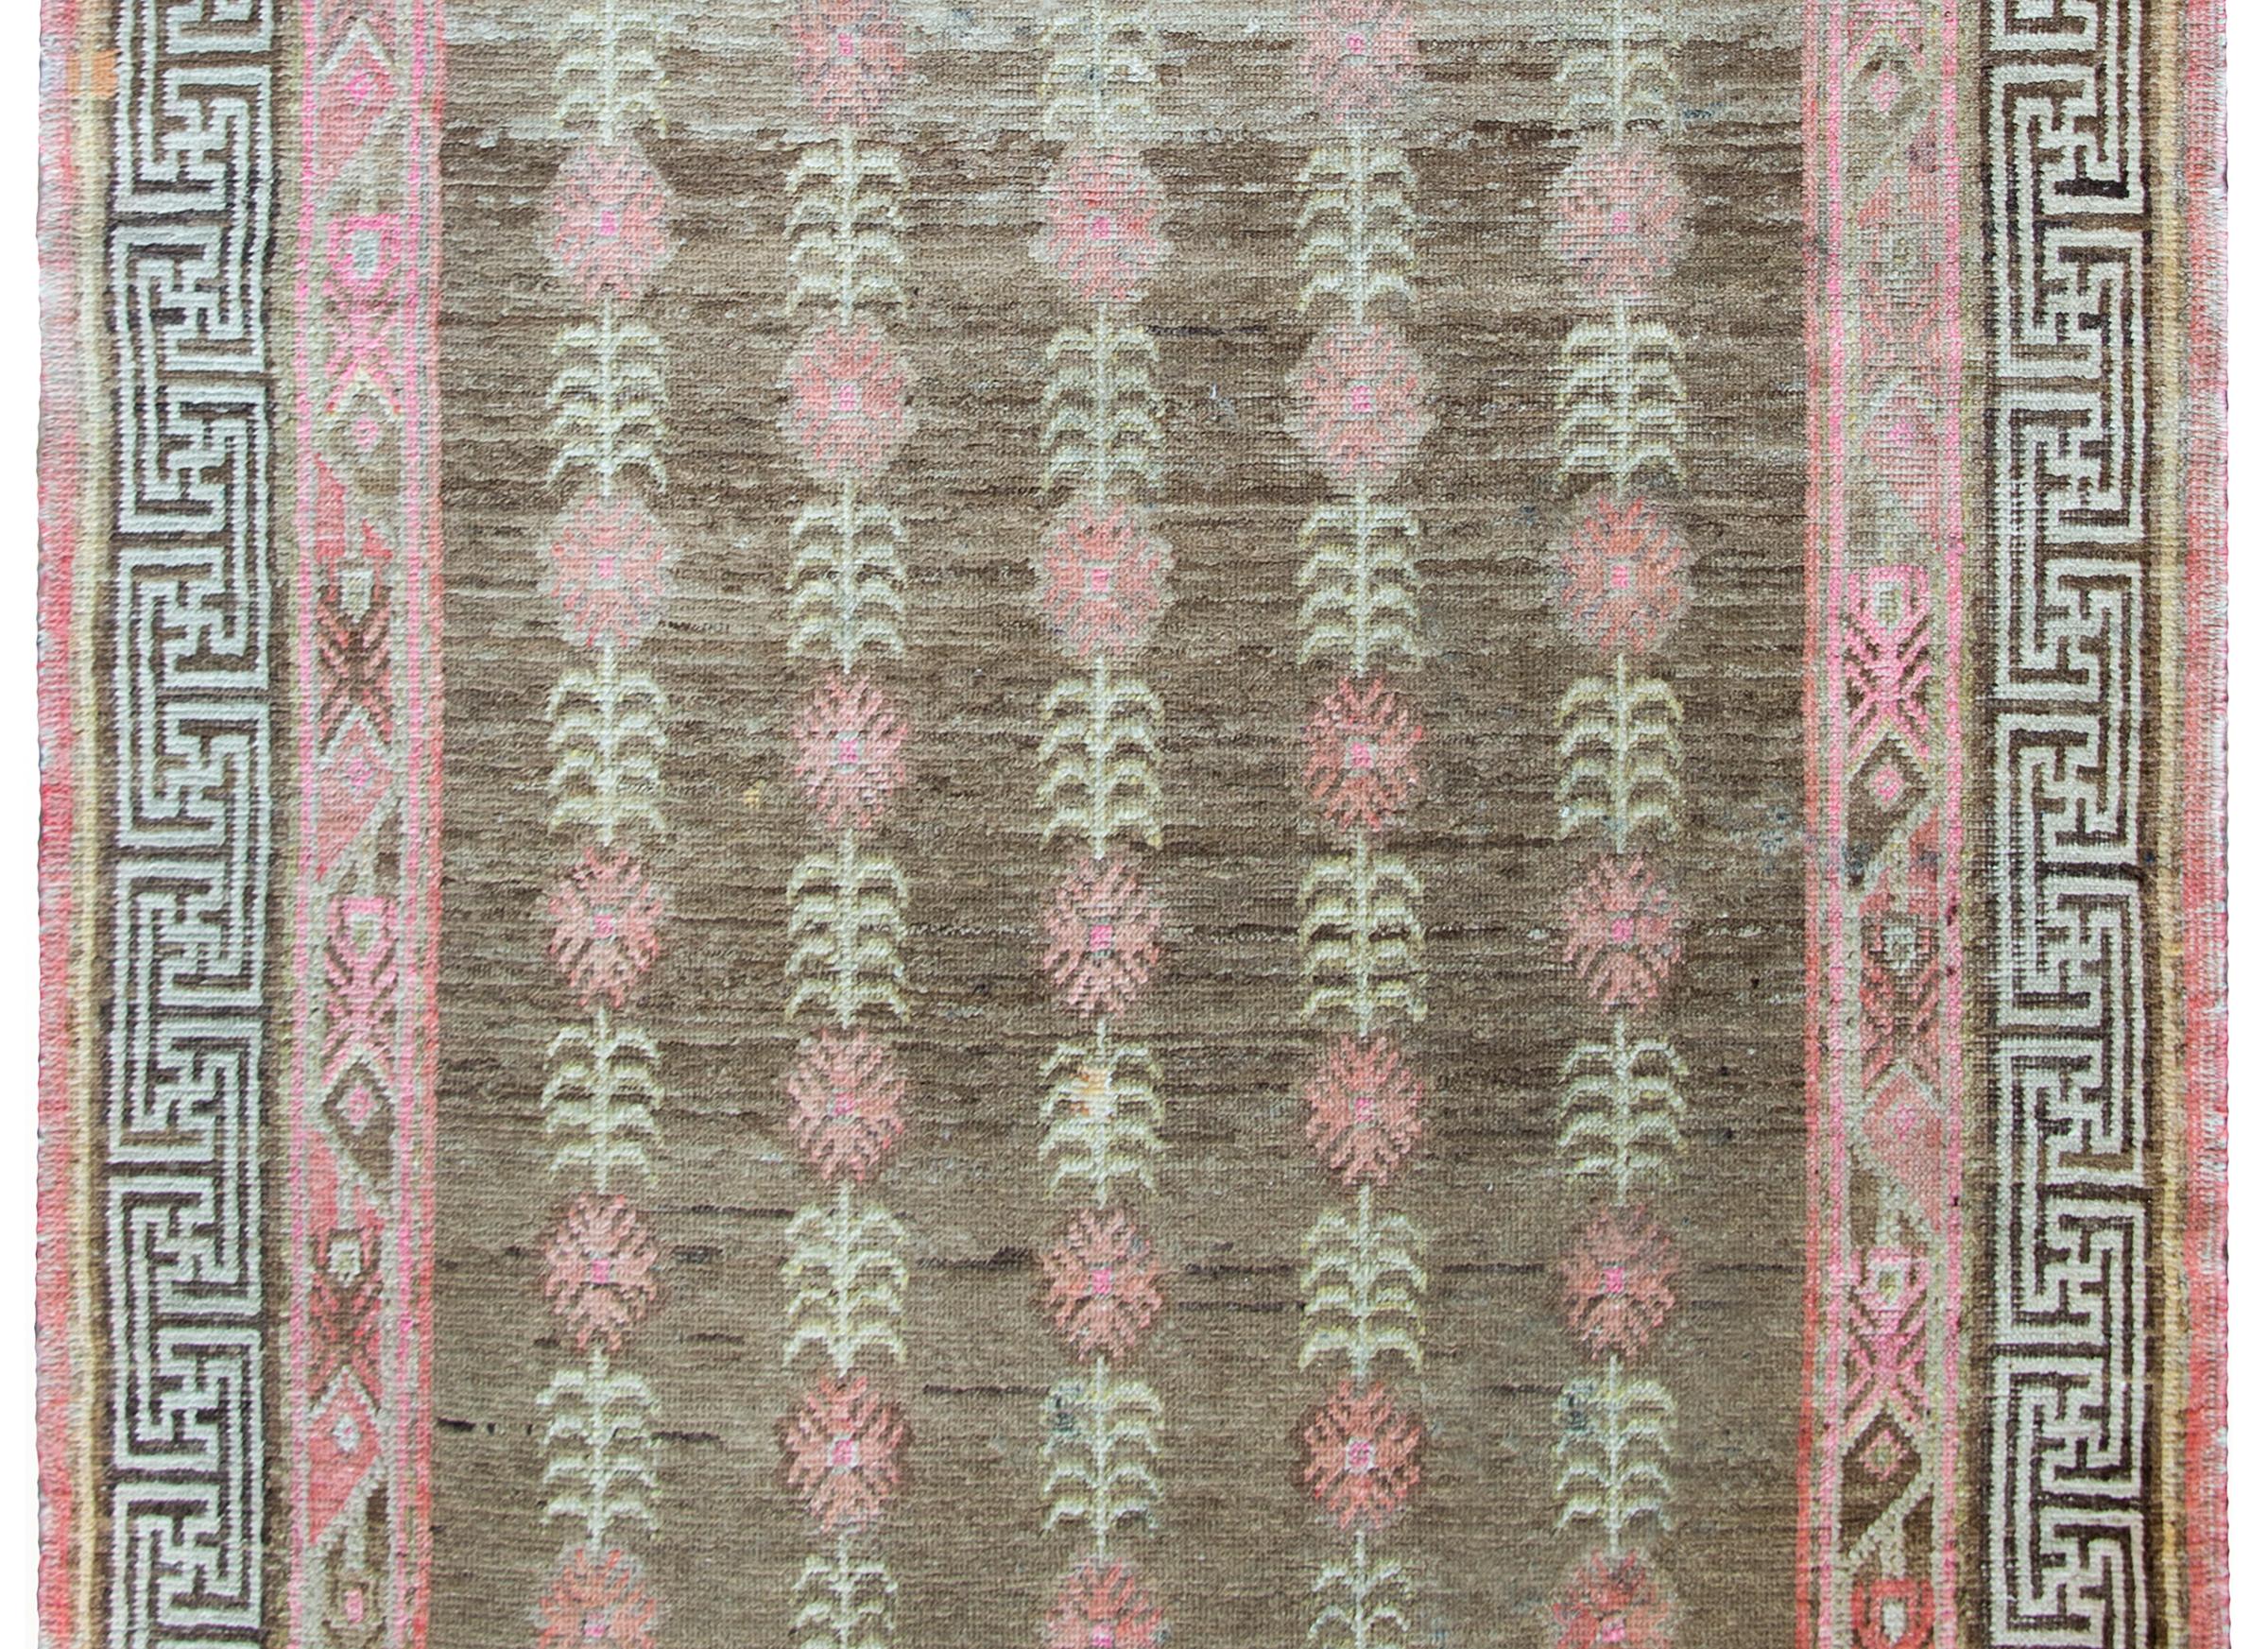 An incredible and rare-patterned early 20th century Central Asian Samarghand rug with a striped tree-of-life pattern with large pink flowers and cream stems and leaves set against a brown background, and surrounded by a complex border with an outer